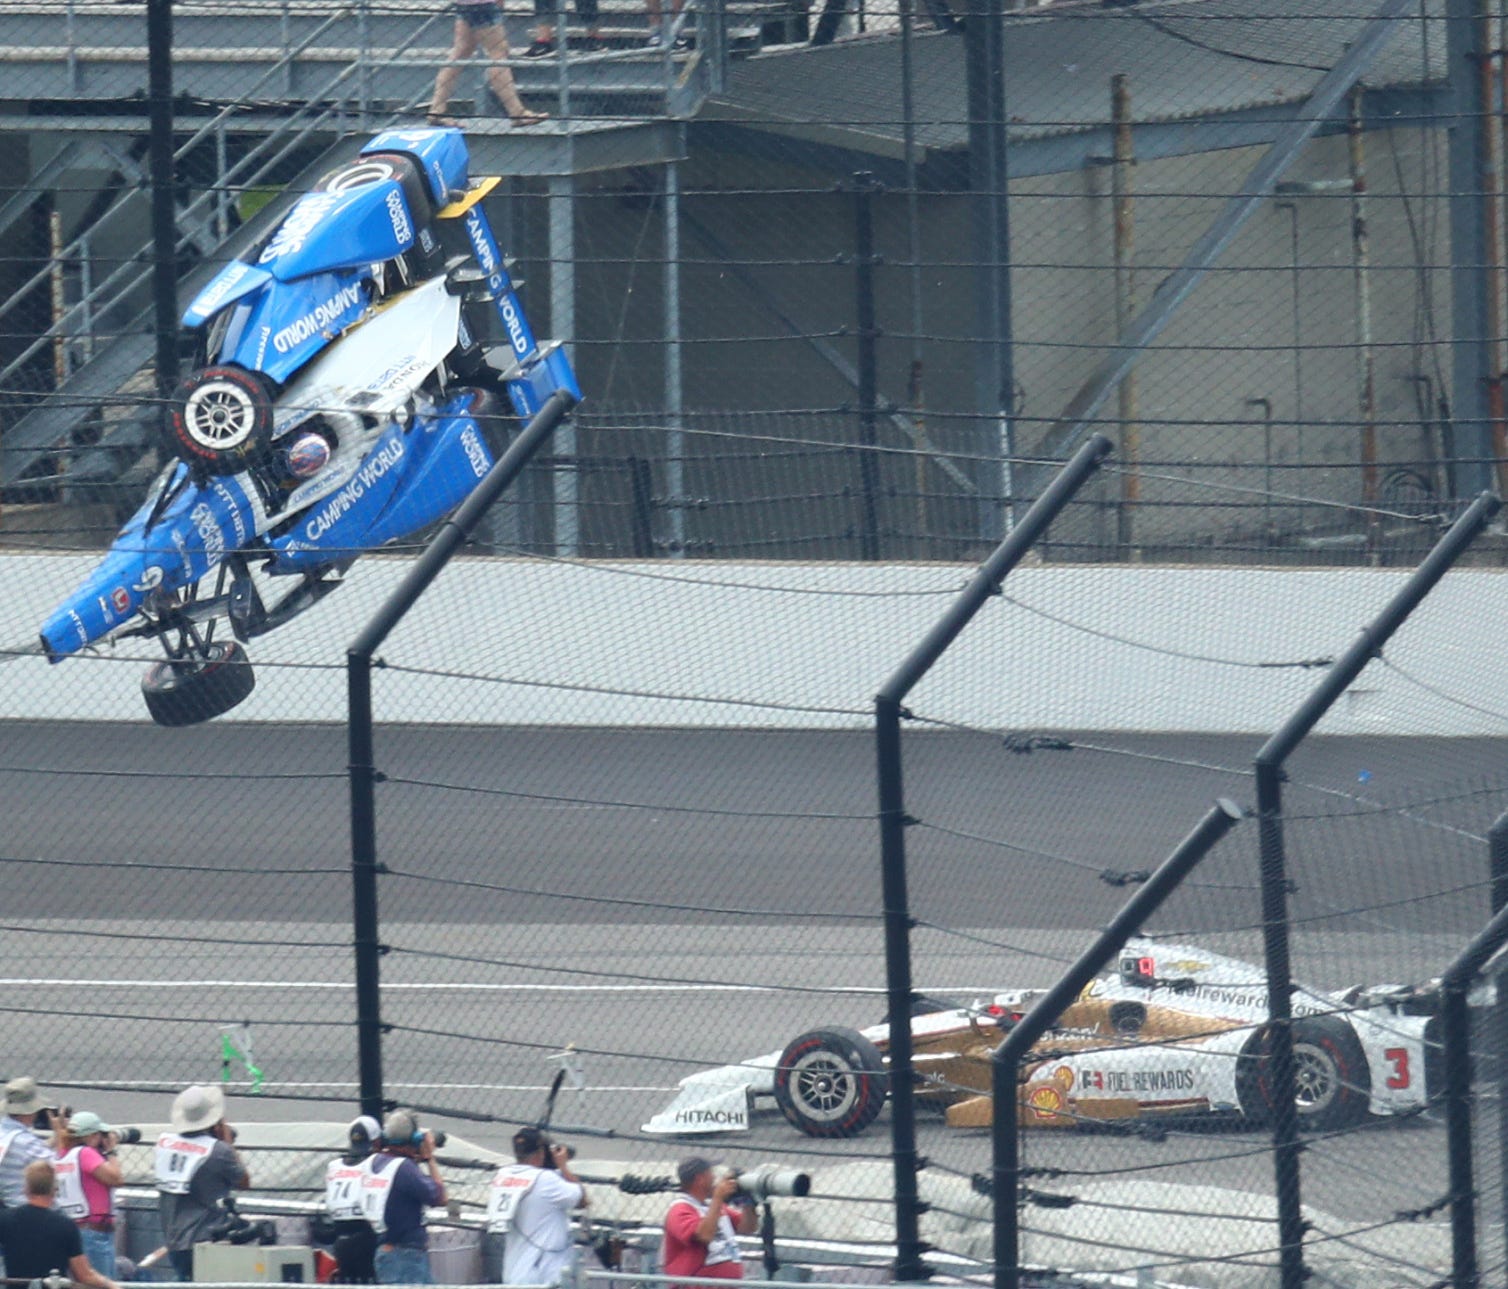 May 28, 2017; Indianapolis, IN, USA; IndyCar Series driver Scott Dixon (9) goes airborne and crashes in front of Helio Castroneves (3) during the 101st Running of the Indianapolis 500 at Indianapolis Motor Speedway. Mandatory Credit: Mark J. Rebilas-